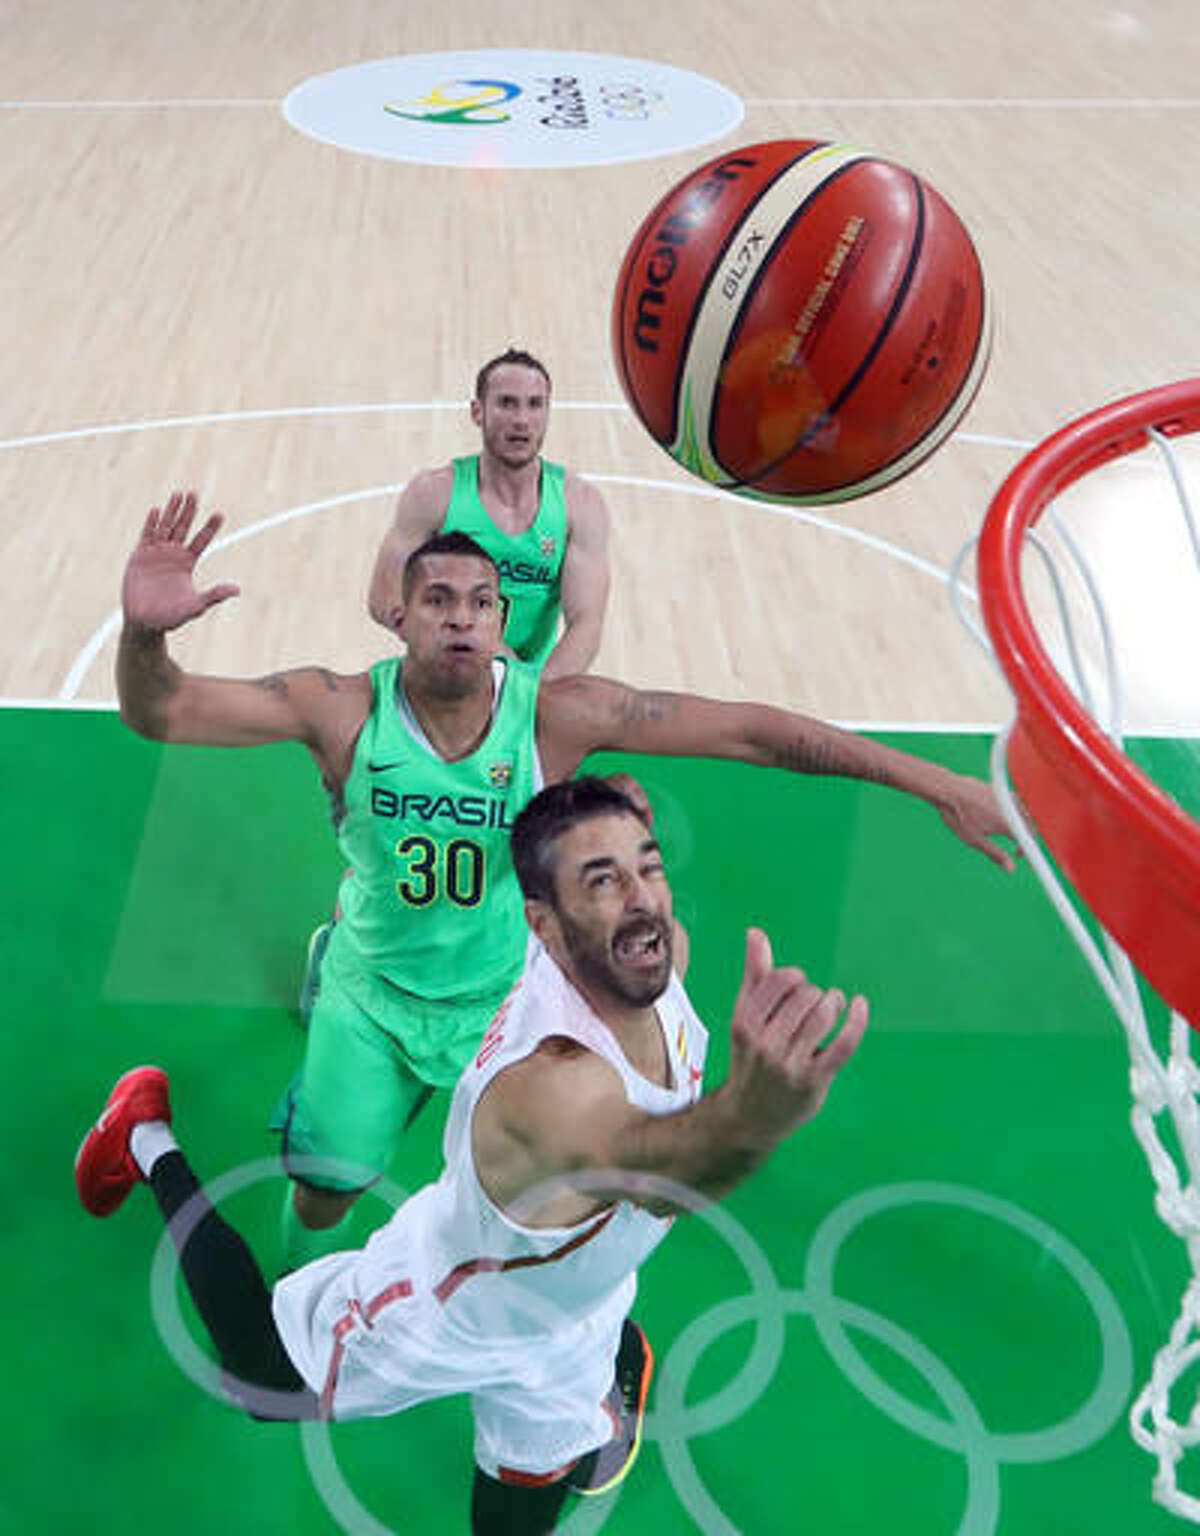 Spain's Ricky Rubio (79) shoots in front of Brazil's Rafael Hettsheimer (30) during a men's basketball game at the 2016 Summer Olympics in Rio de Janeiro, Brazil, Tuesday, Aug. 9, 2016. (Alex Livesey/Pool Photo via AP)